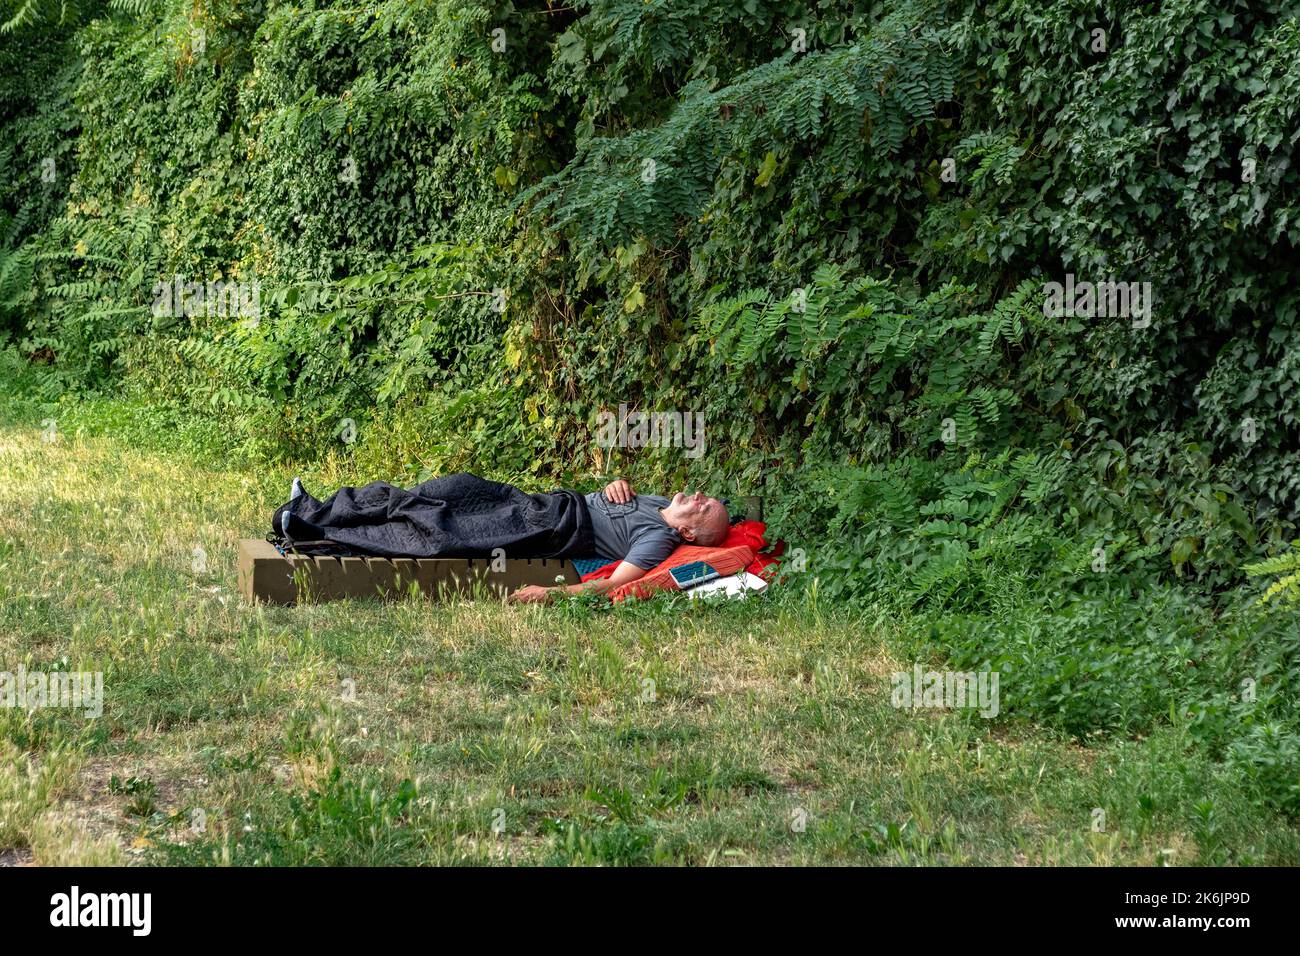 Berlin, Germany, July 21. A homeless man sleeps on a foam mattress in the open air in the city square, in the evening in Berlin on July 21, 2022. Stock Photo